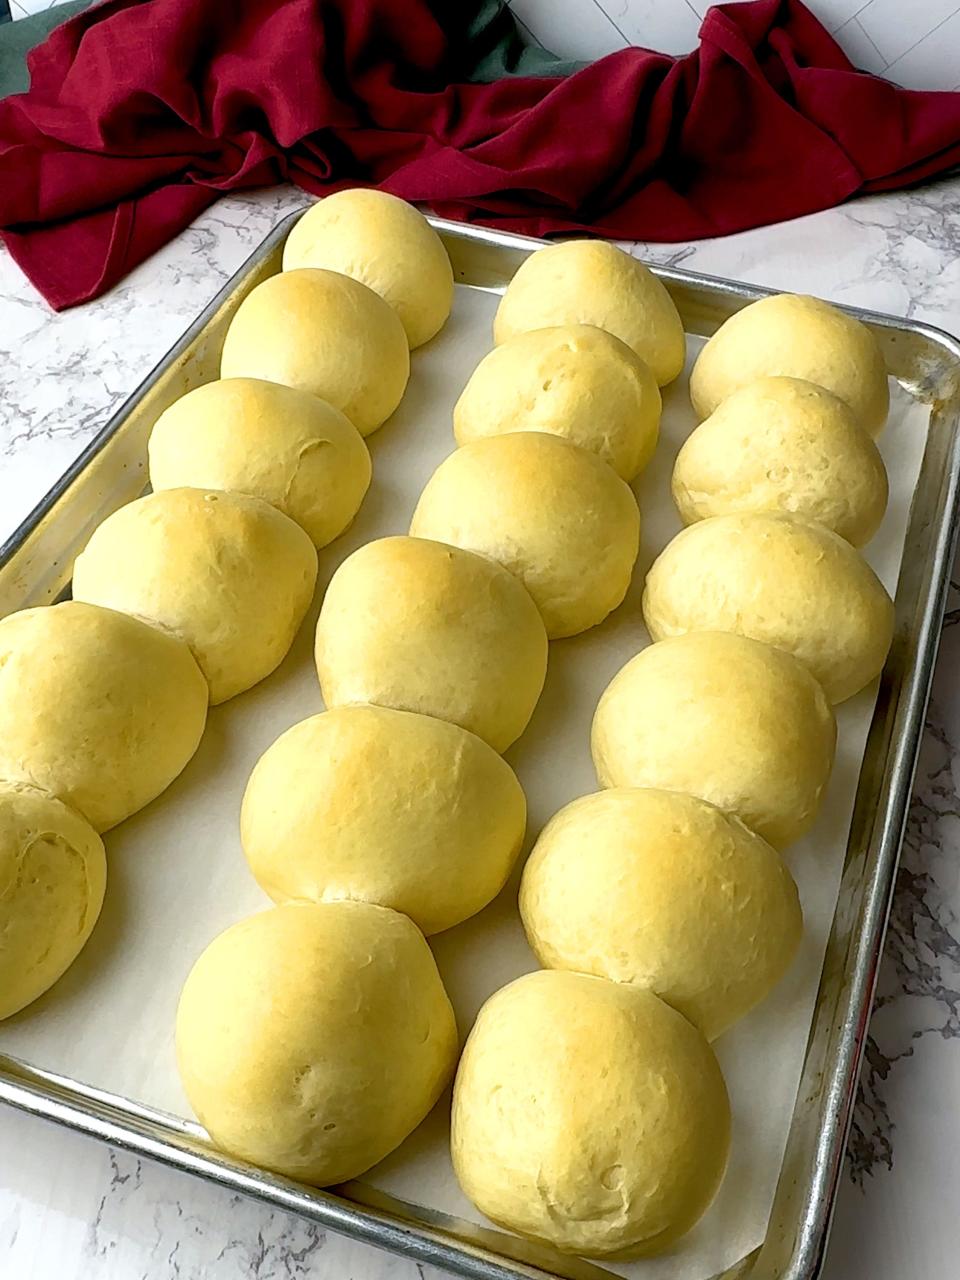 To the rolls are initially parbaked. At this point, the rolls have very little color and are very delicate.